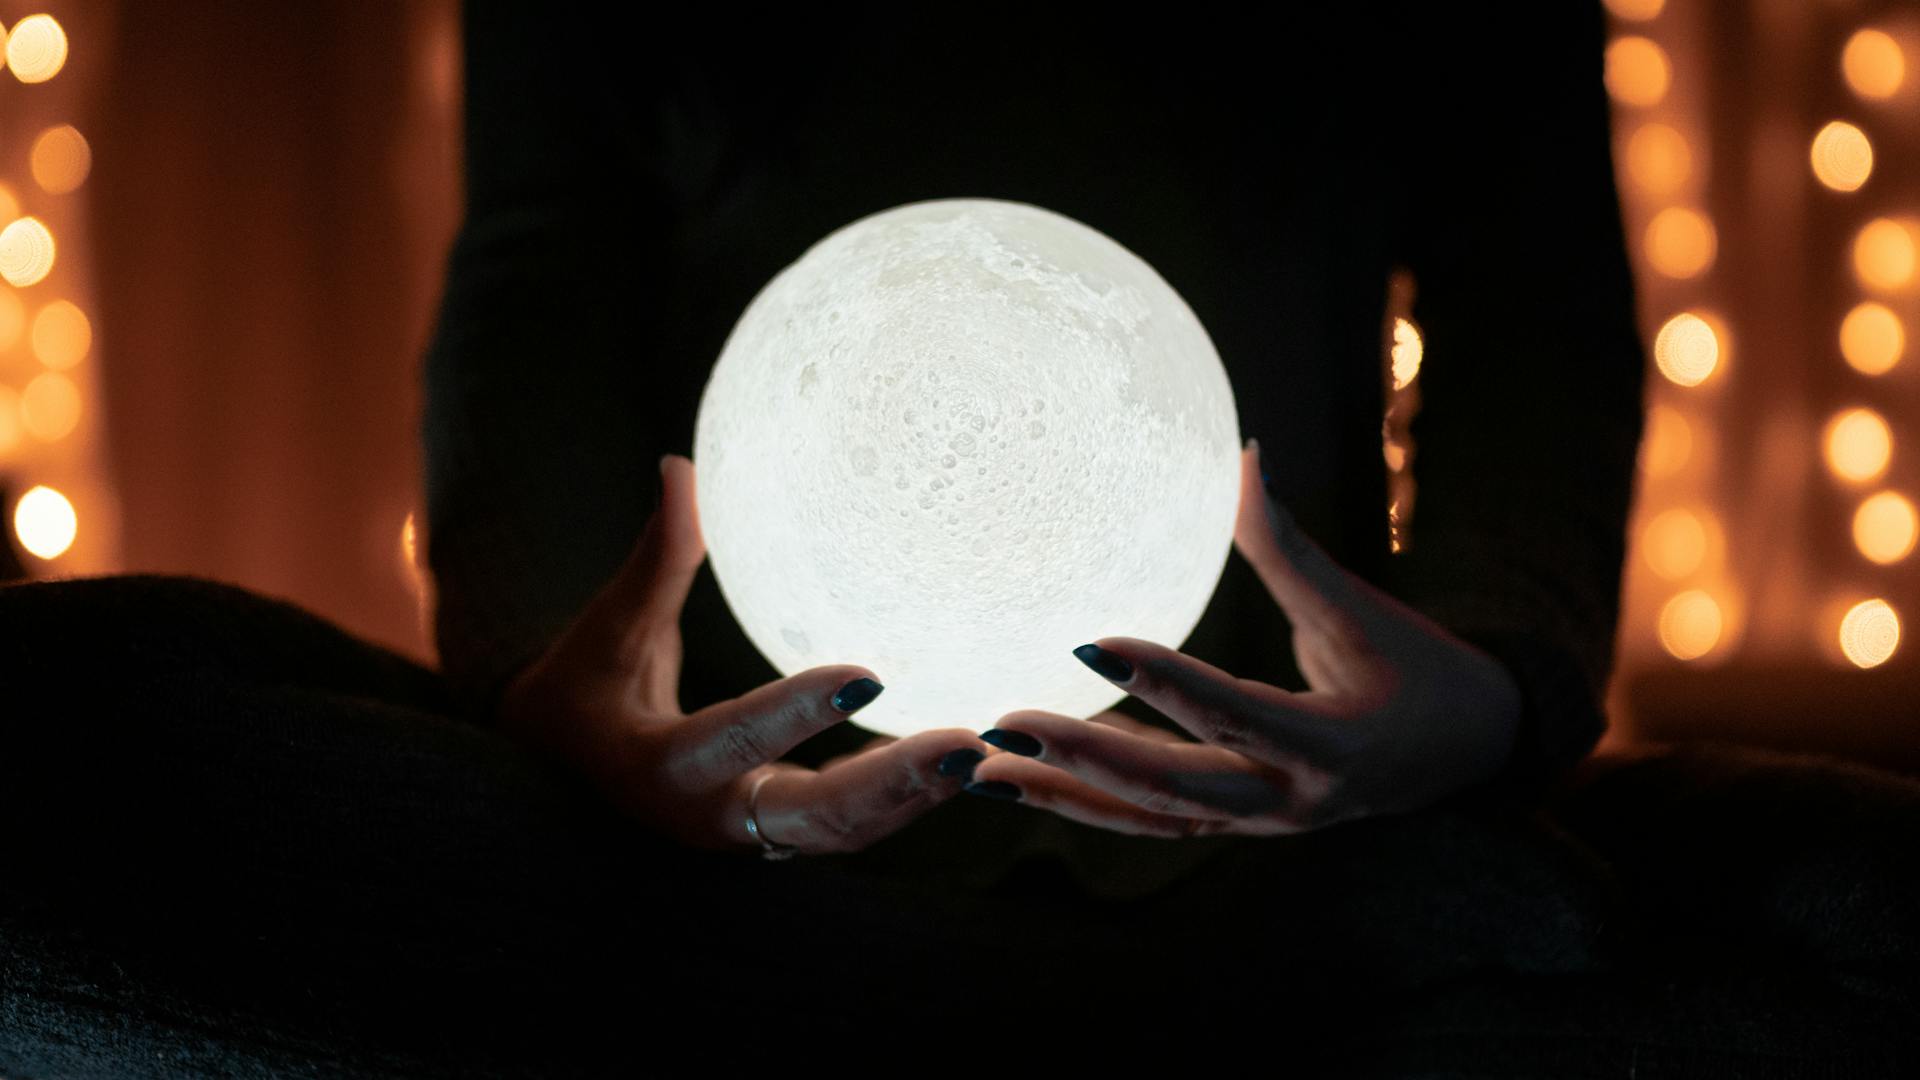 A person holding a crystal ball | Source: Pexels